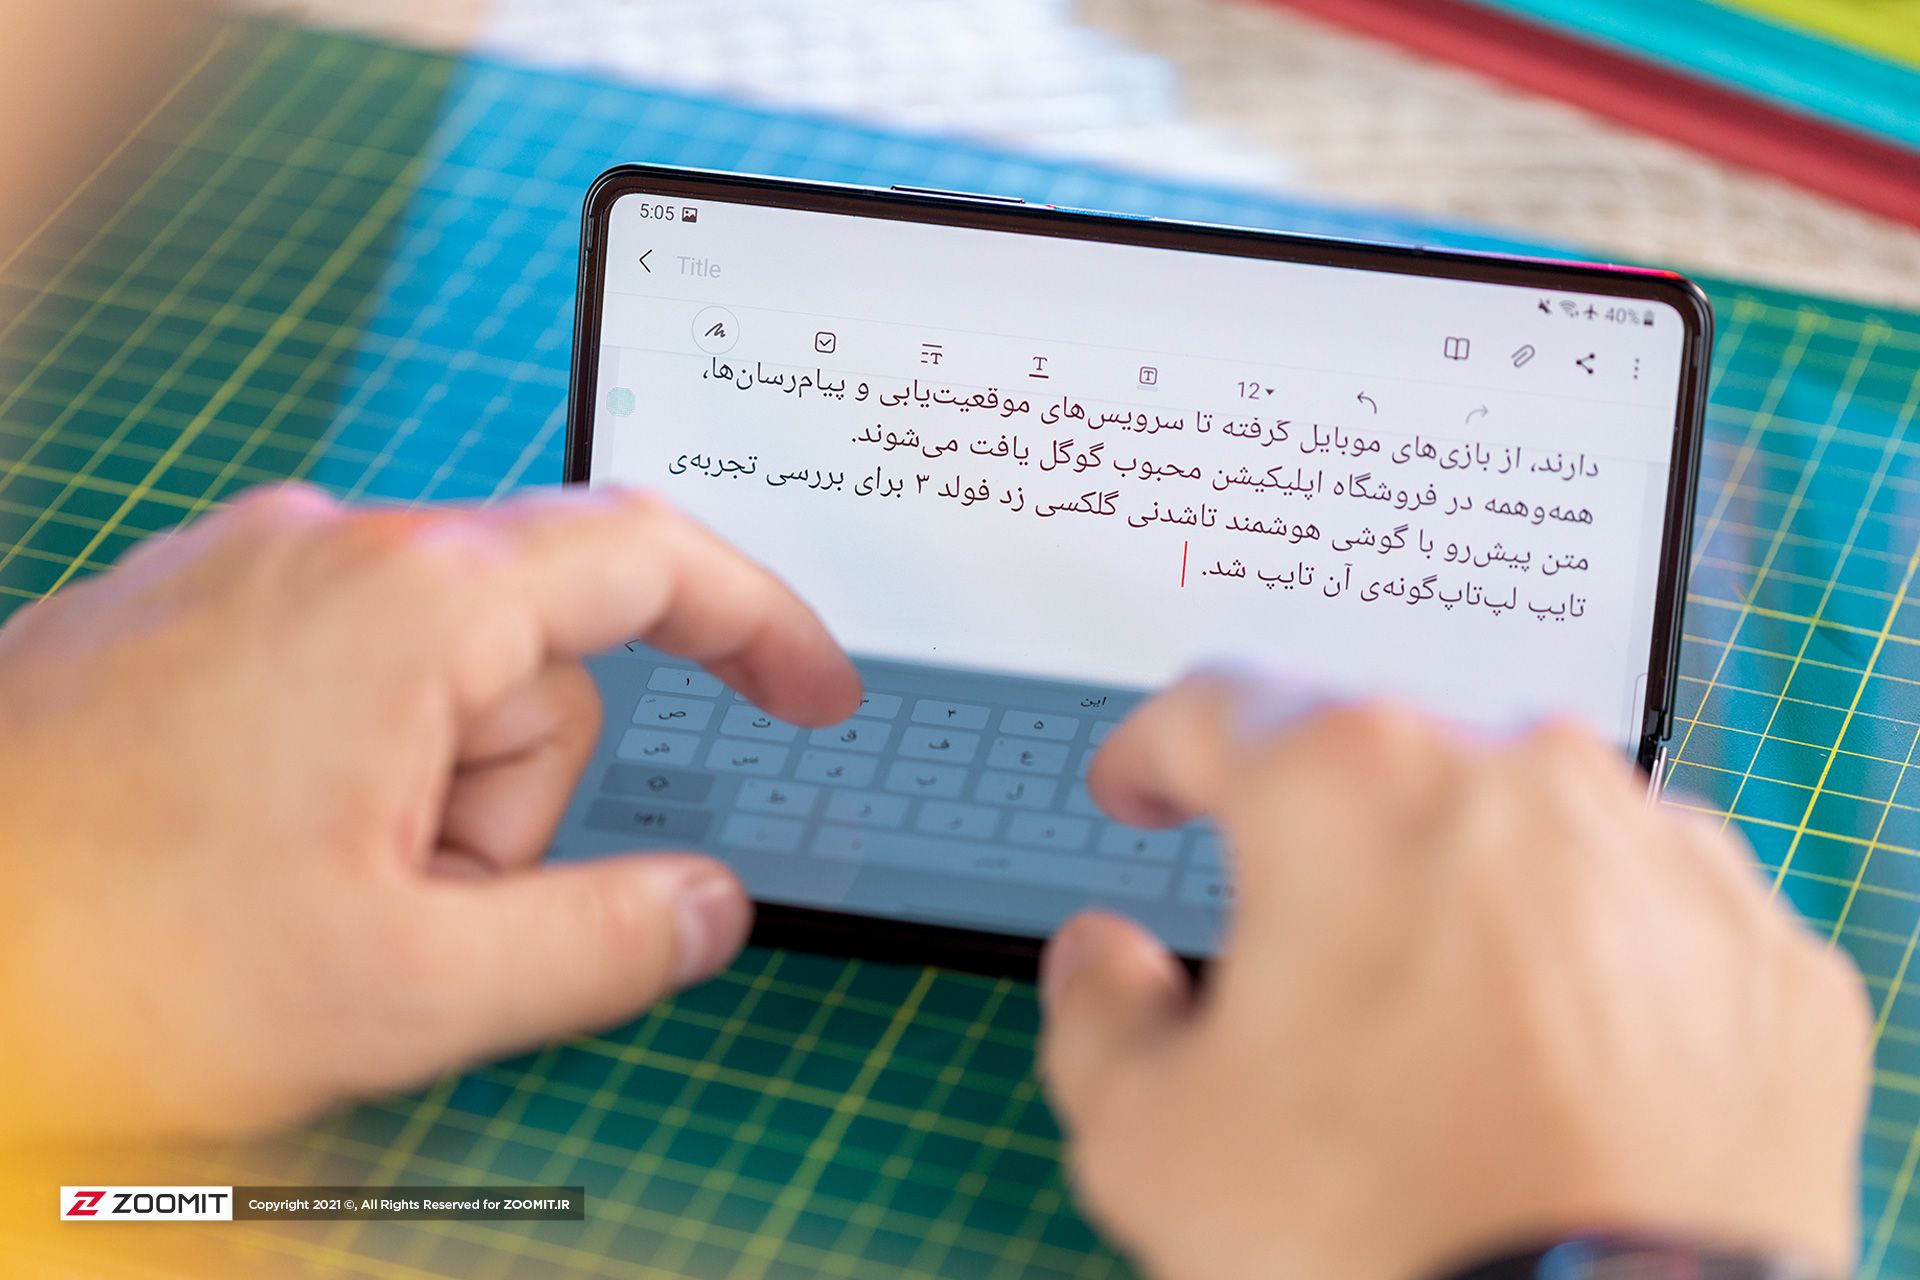 Laptop-like typing experience on the Galaxy Z Fold 3